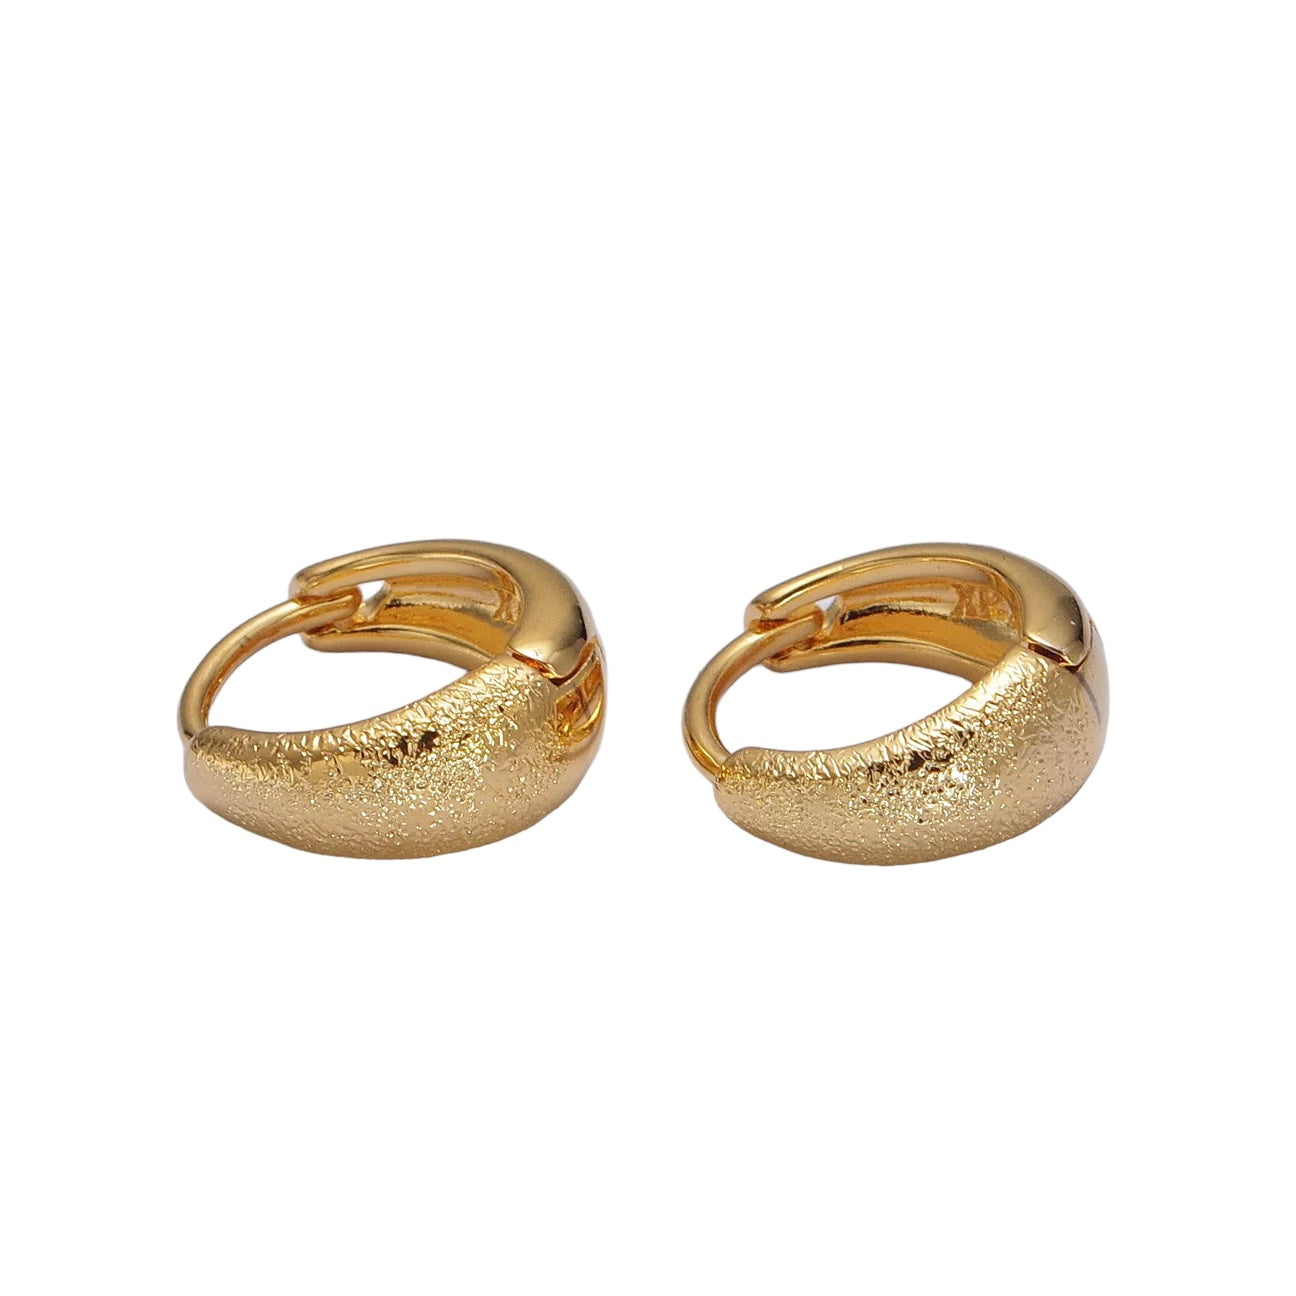 24K Gold Filled 11mm Textured Dome Huggie Earrings